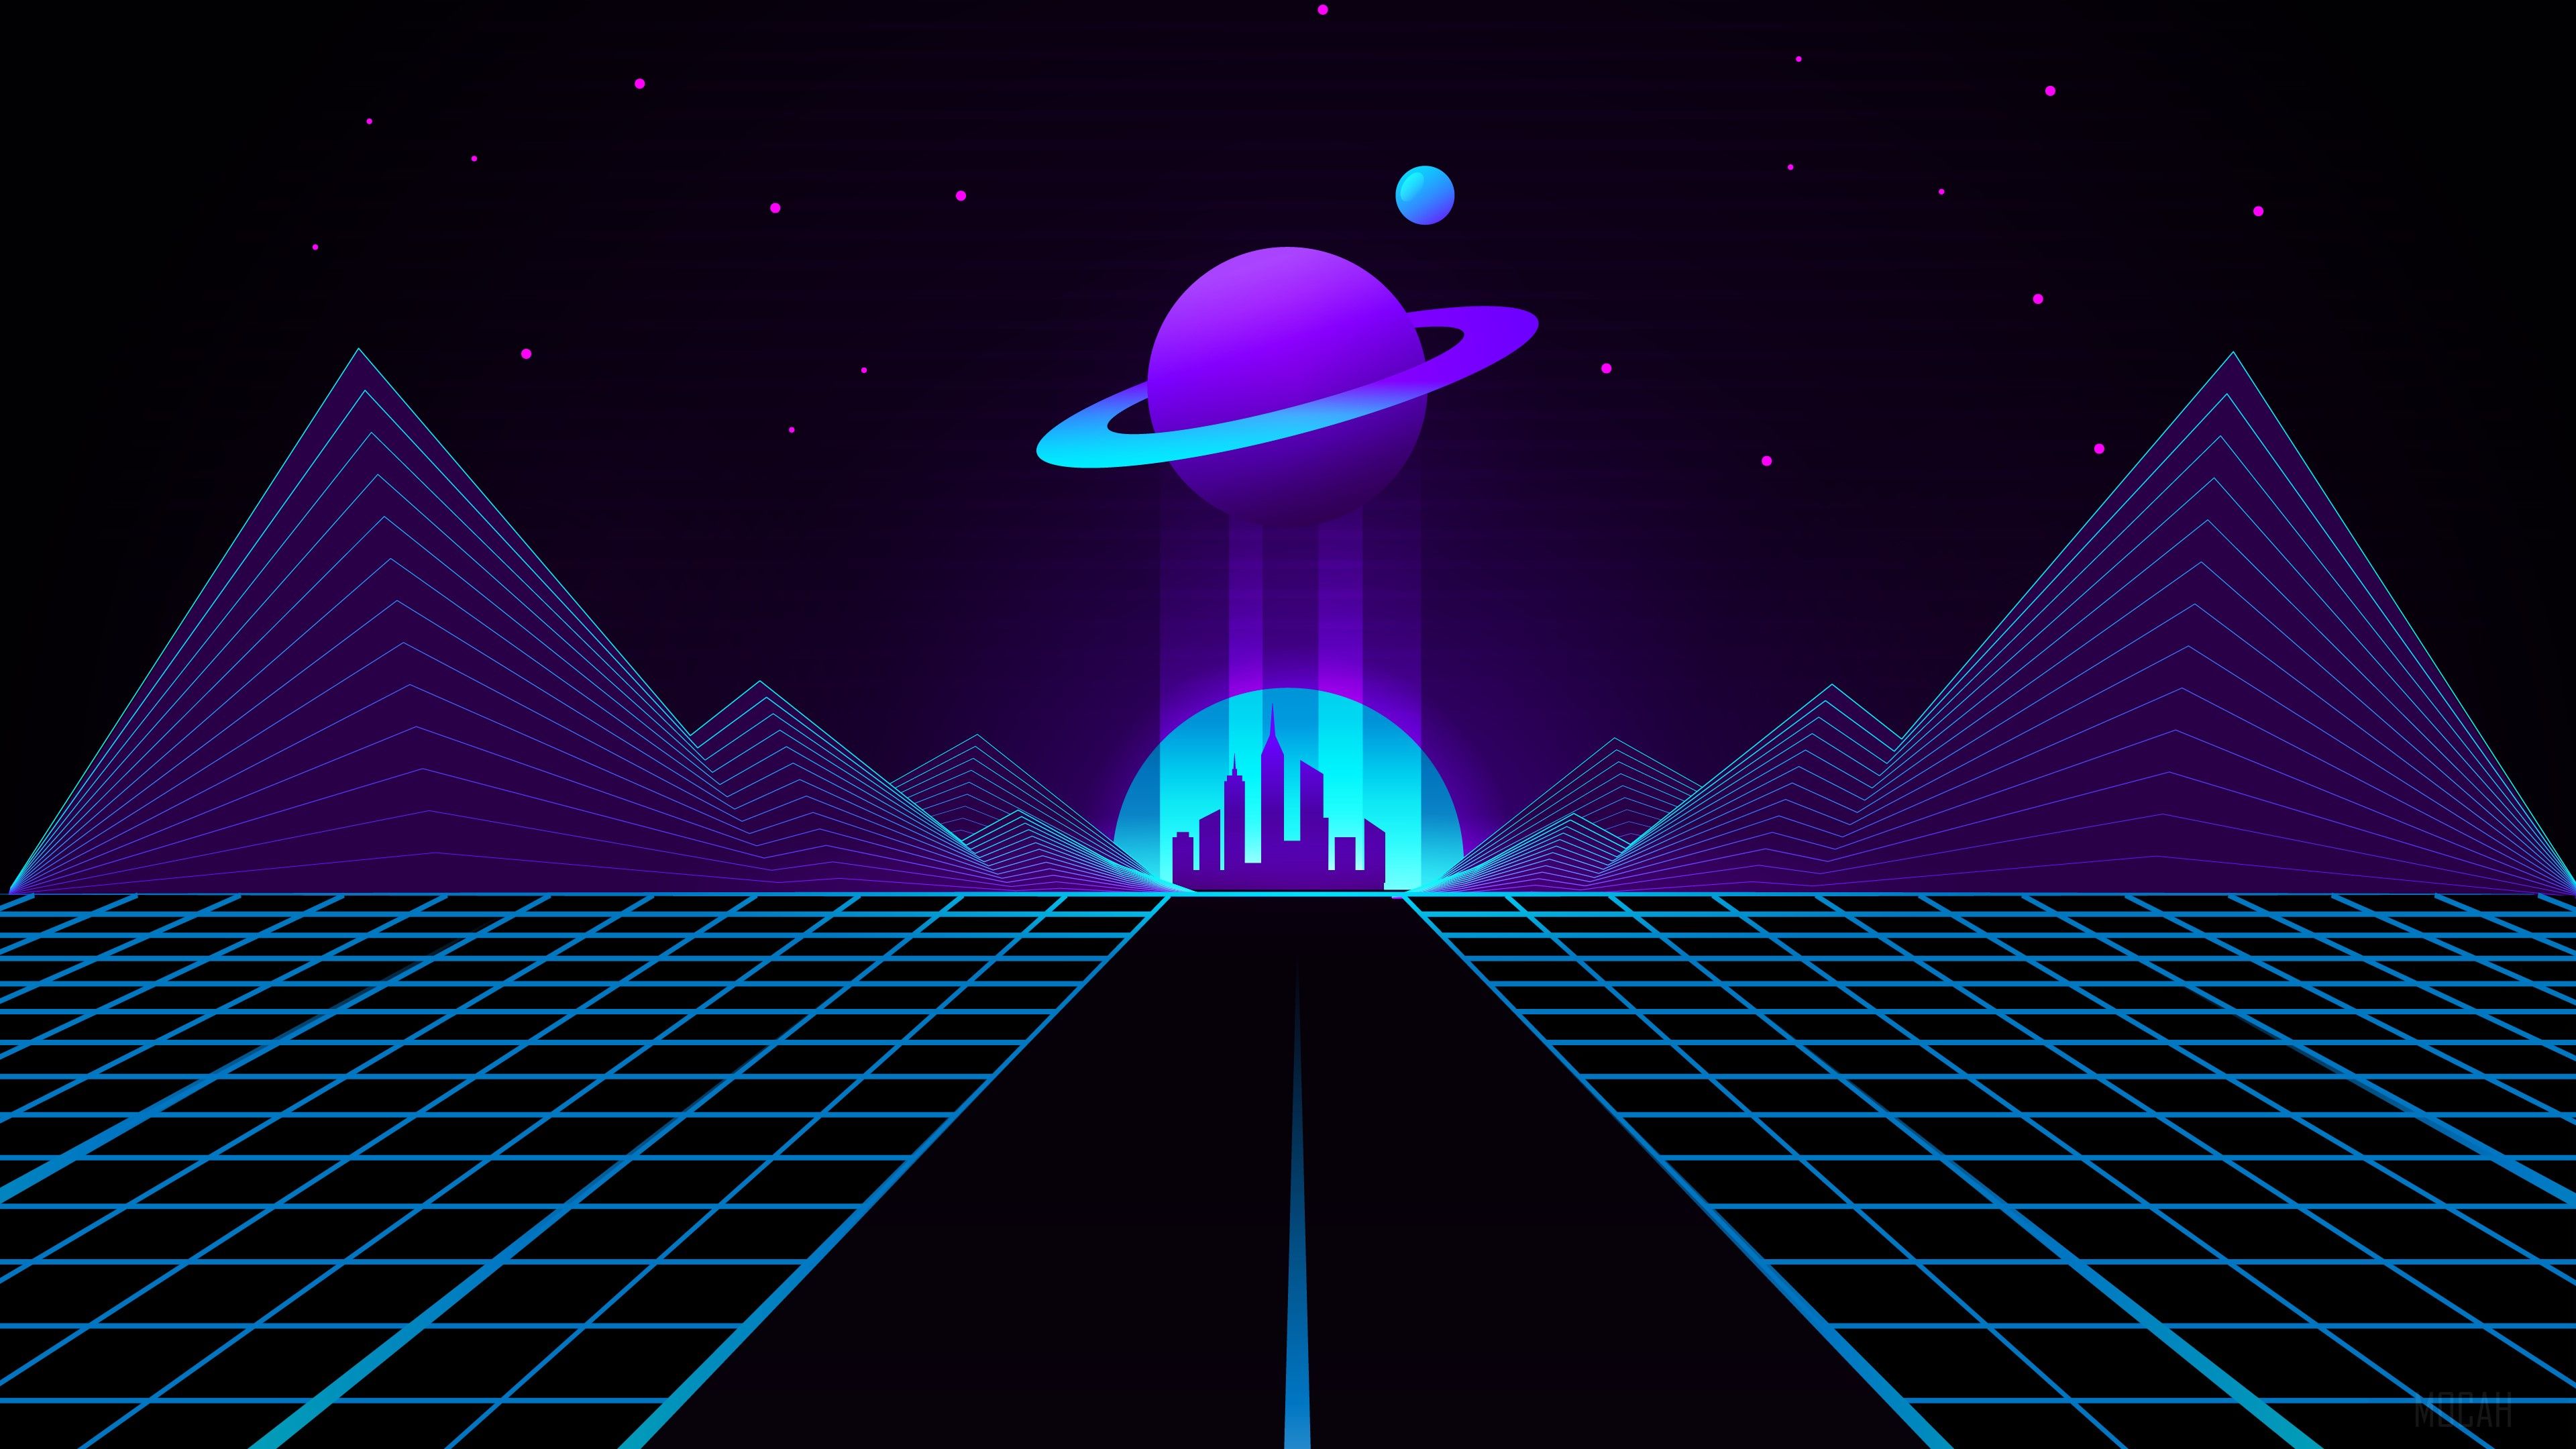 80s synthwave wallpaper 2020 | retro wave | synthwave aesthetic | retro aesthetic | retro wave wallpaper | synthwave wallpaper | retro wave music | retro wave aesthetic | retro wave background | retro wave wallpaper | retro wave aesthetic wallpaper | retro wave aesthetic background | retro wave aesthetic wallpaper | retro wave aesthetic background | retro wave aesthetic | retro wave wallpaper | retro wave aesthetic wallpaper | retro wave aesthetic background | retro wave aesthetic | retro wave wallpaper | retro wave aesthetic wallpaper | retro wave aesthetic background - Synthwave, Saturn